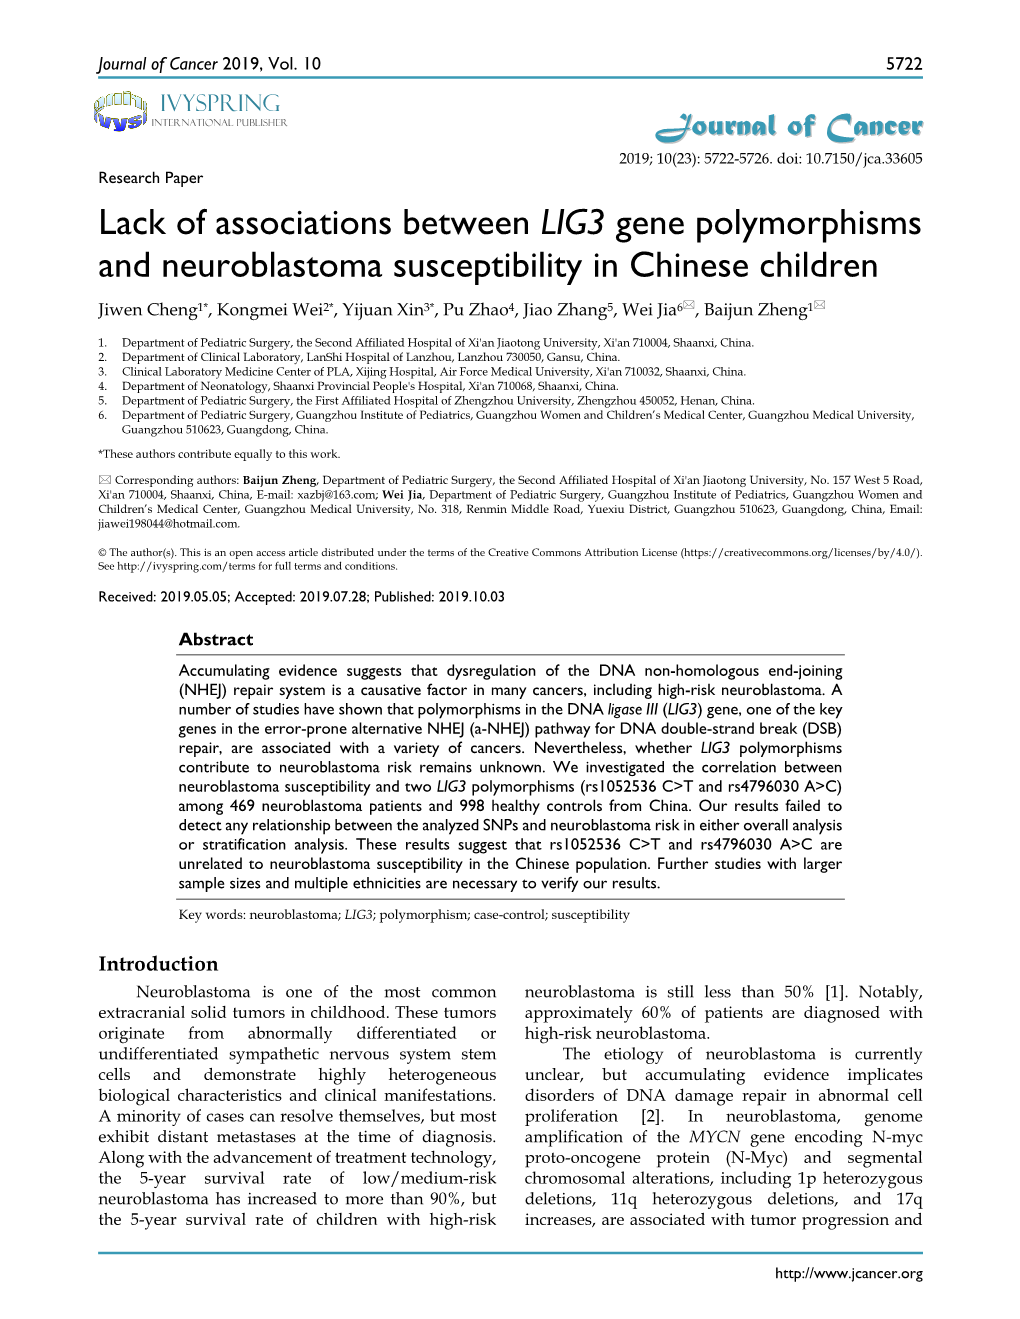 Lack of Associations Between LIG3 Gene Polymorphisms And